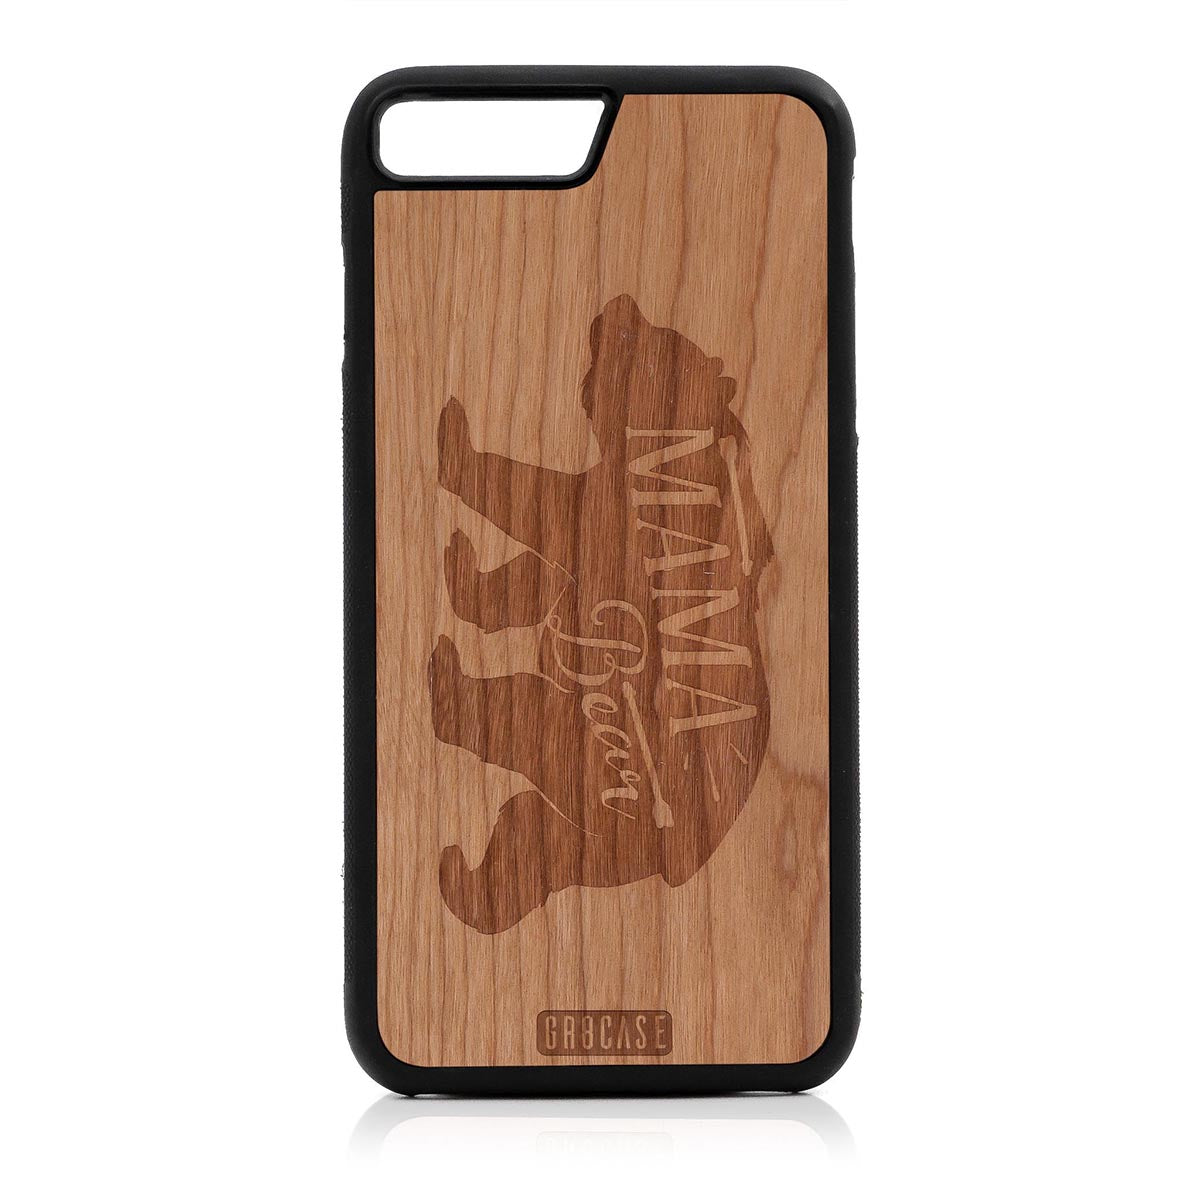 Mama Bear Design Wood Case For iPhone 7 Plus / 8 Plus by GR8CASE